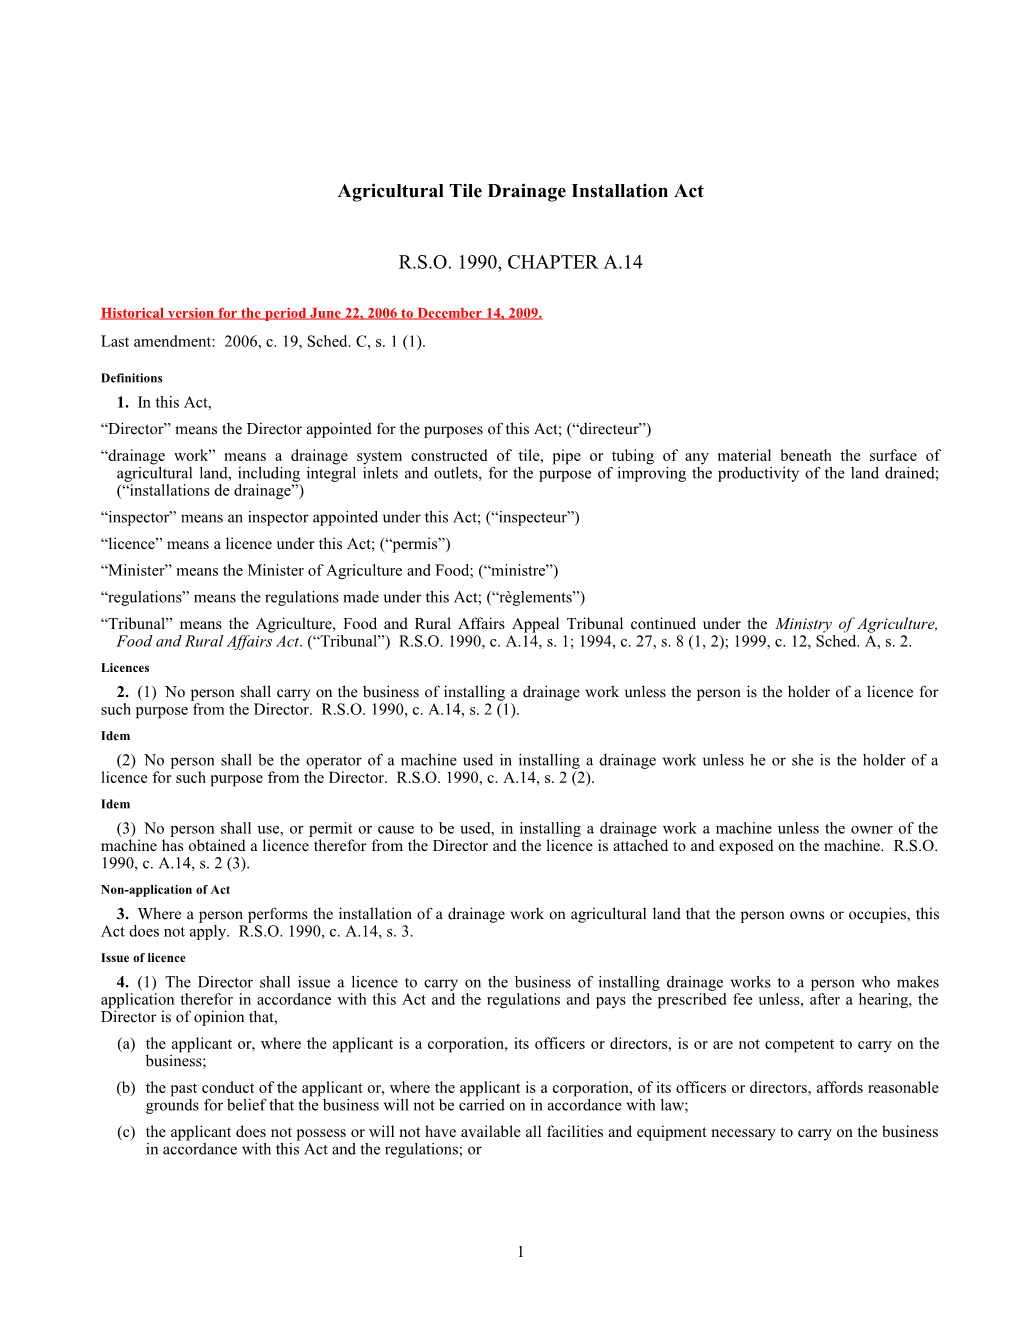 Agricultural Tile Drainage Installation Act, R.S.O. 1990, C. A.14